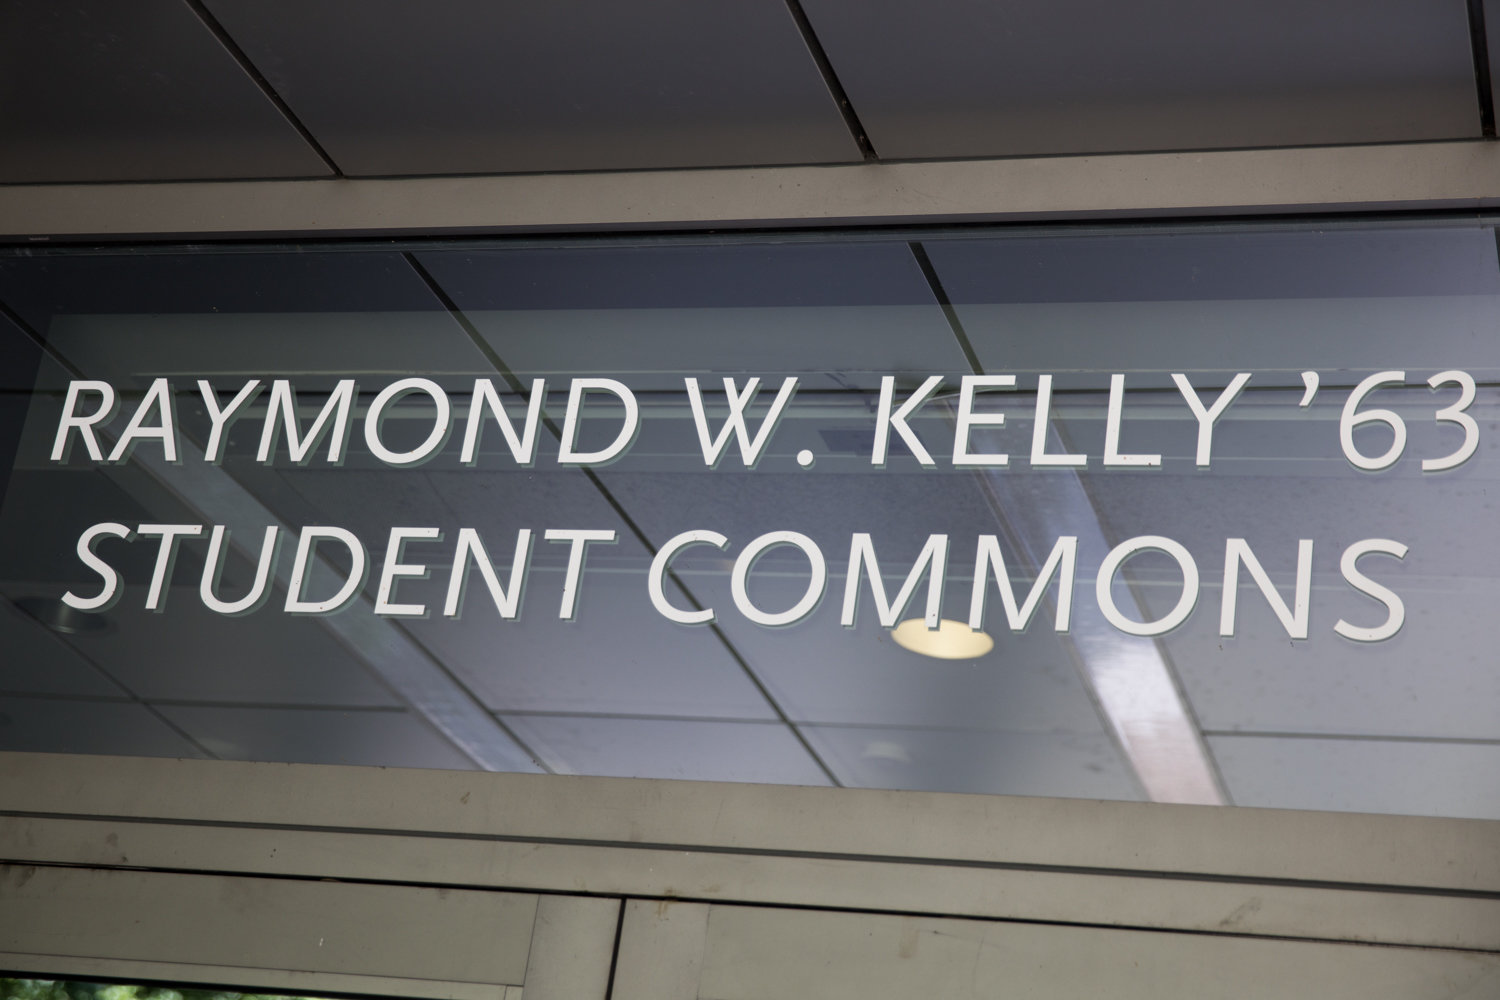 A 1963 alum of Manhattan College, Raymond Kelly is more widely known as the longest-serving police commissioner in the city’s history. Yet, students and faculty are pushing to rename his Kelly Commons campus building in light of the protests against police brutality that have swept the nation.